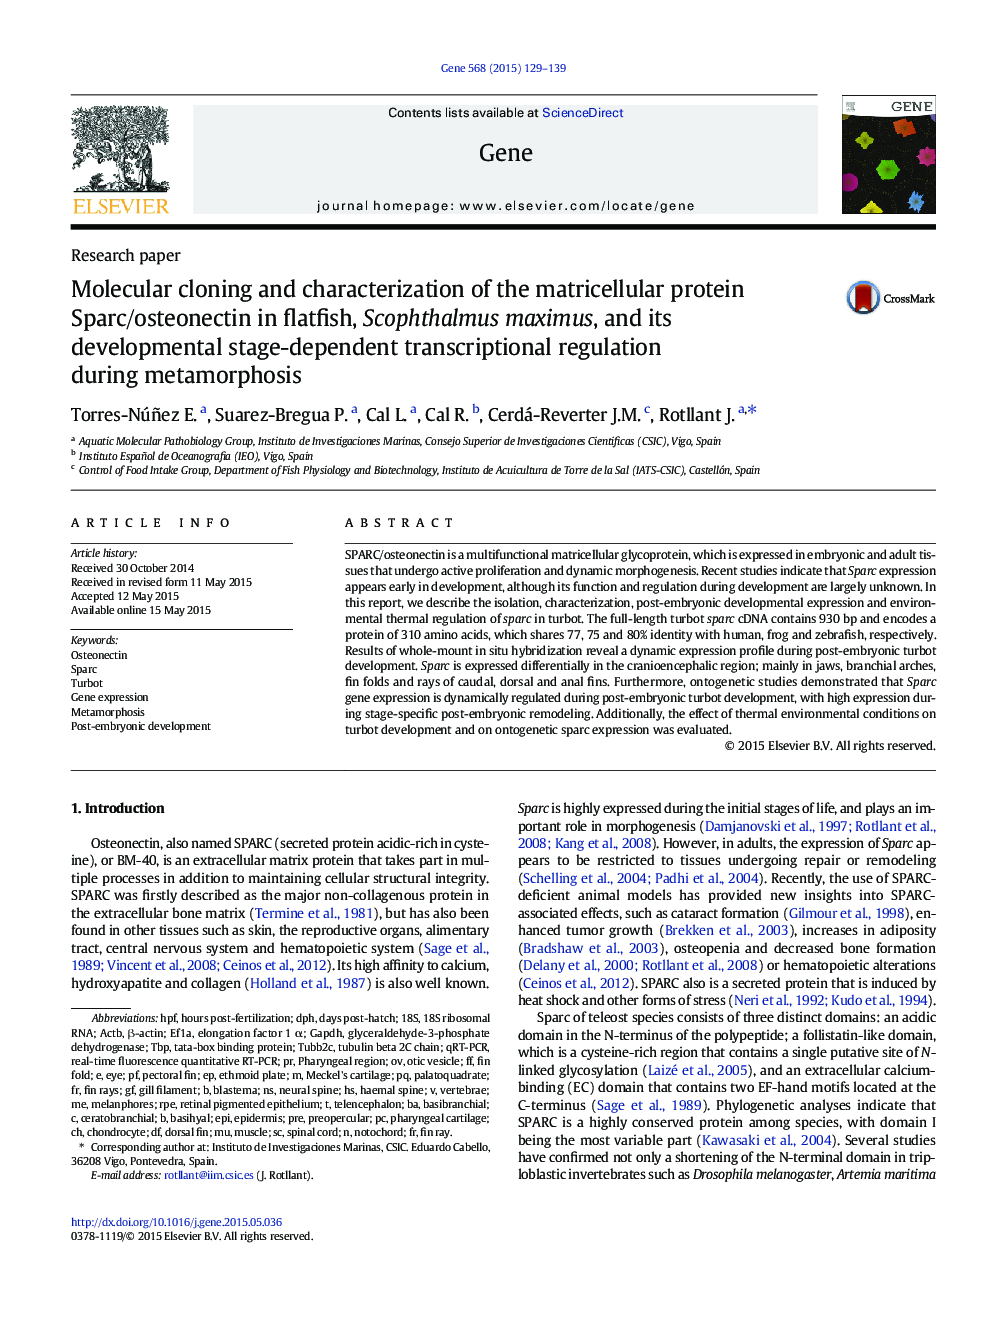 Molecular cloning and characterization of the matricellular protein Sparc/osteonectin in flatfish, Scophthalmus maximus, and its developmental stage-dependent transcriptional regulation during metamorphosis